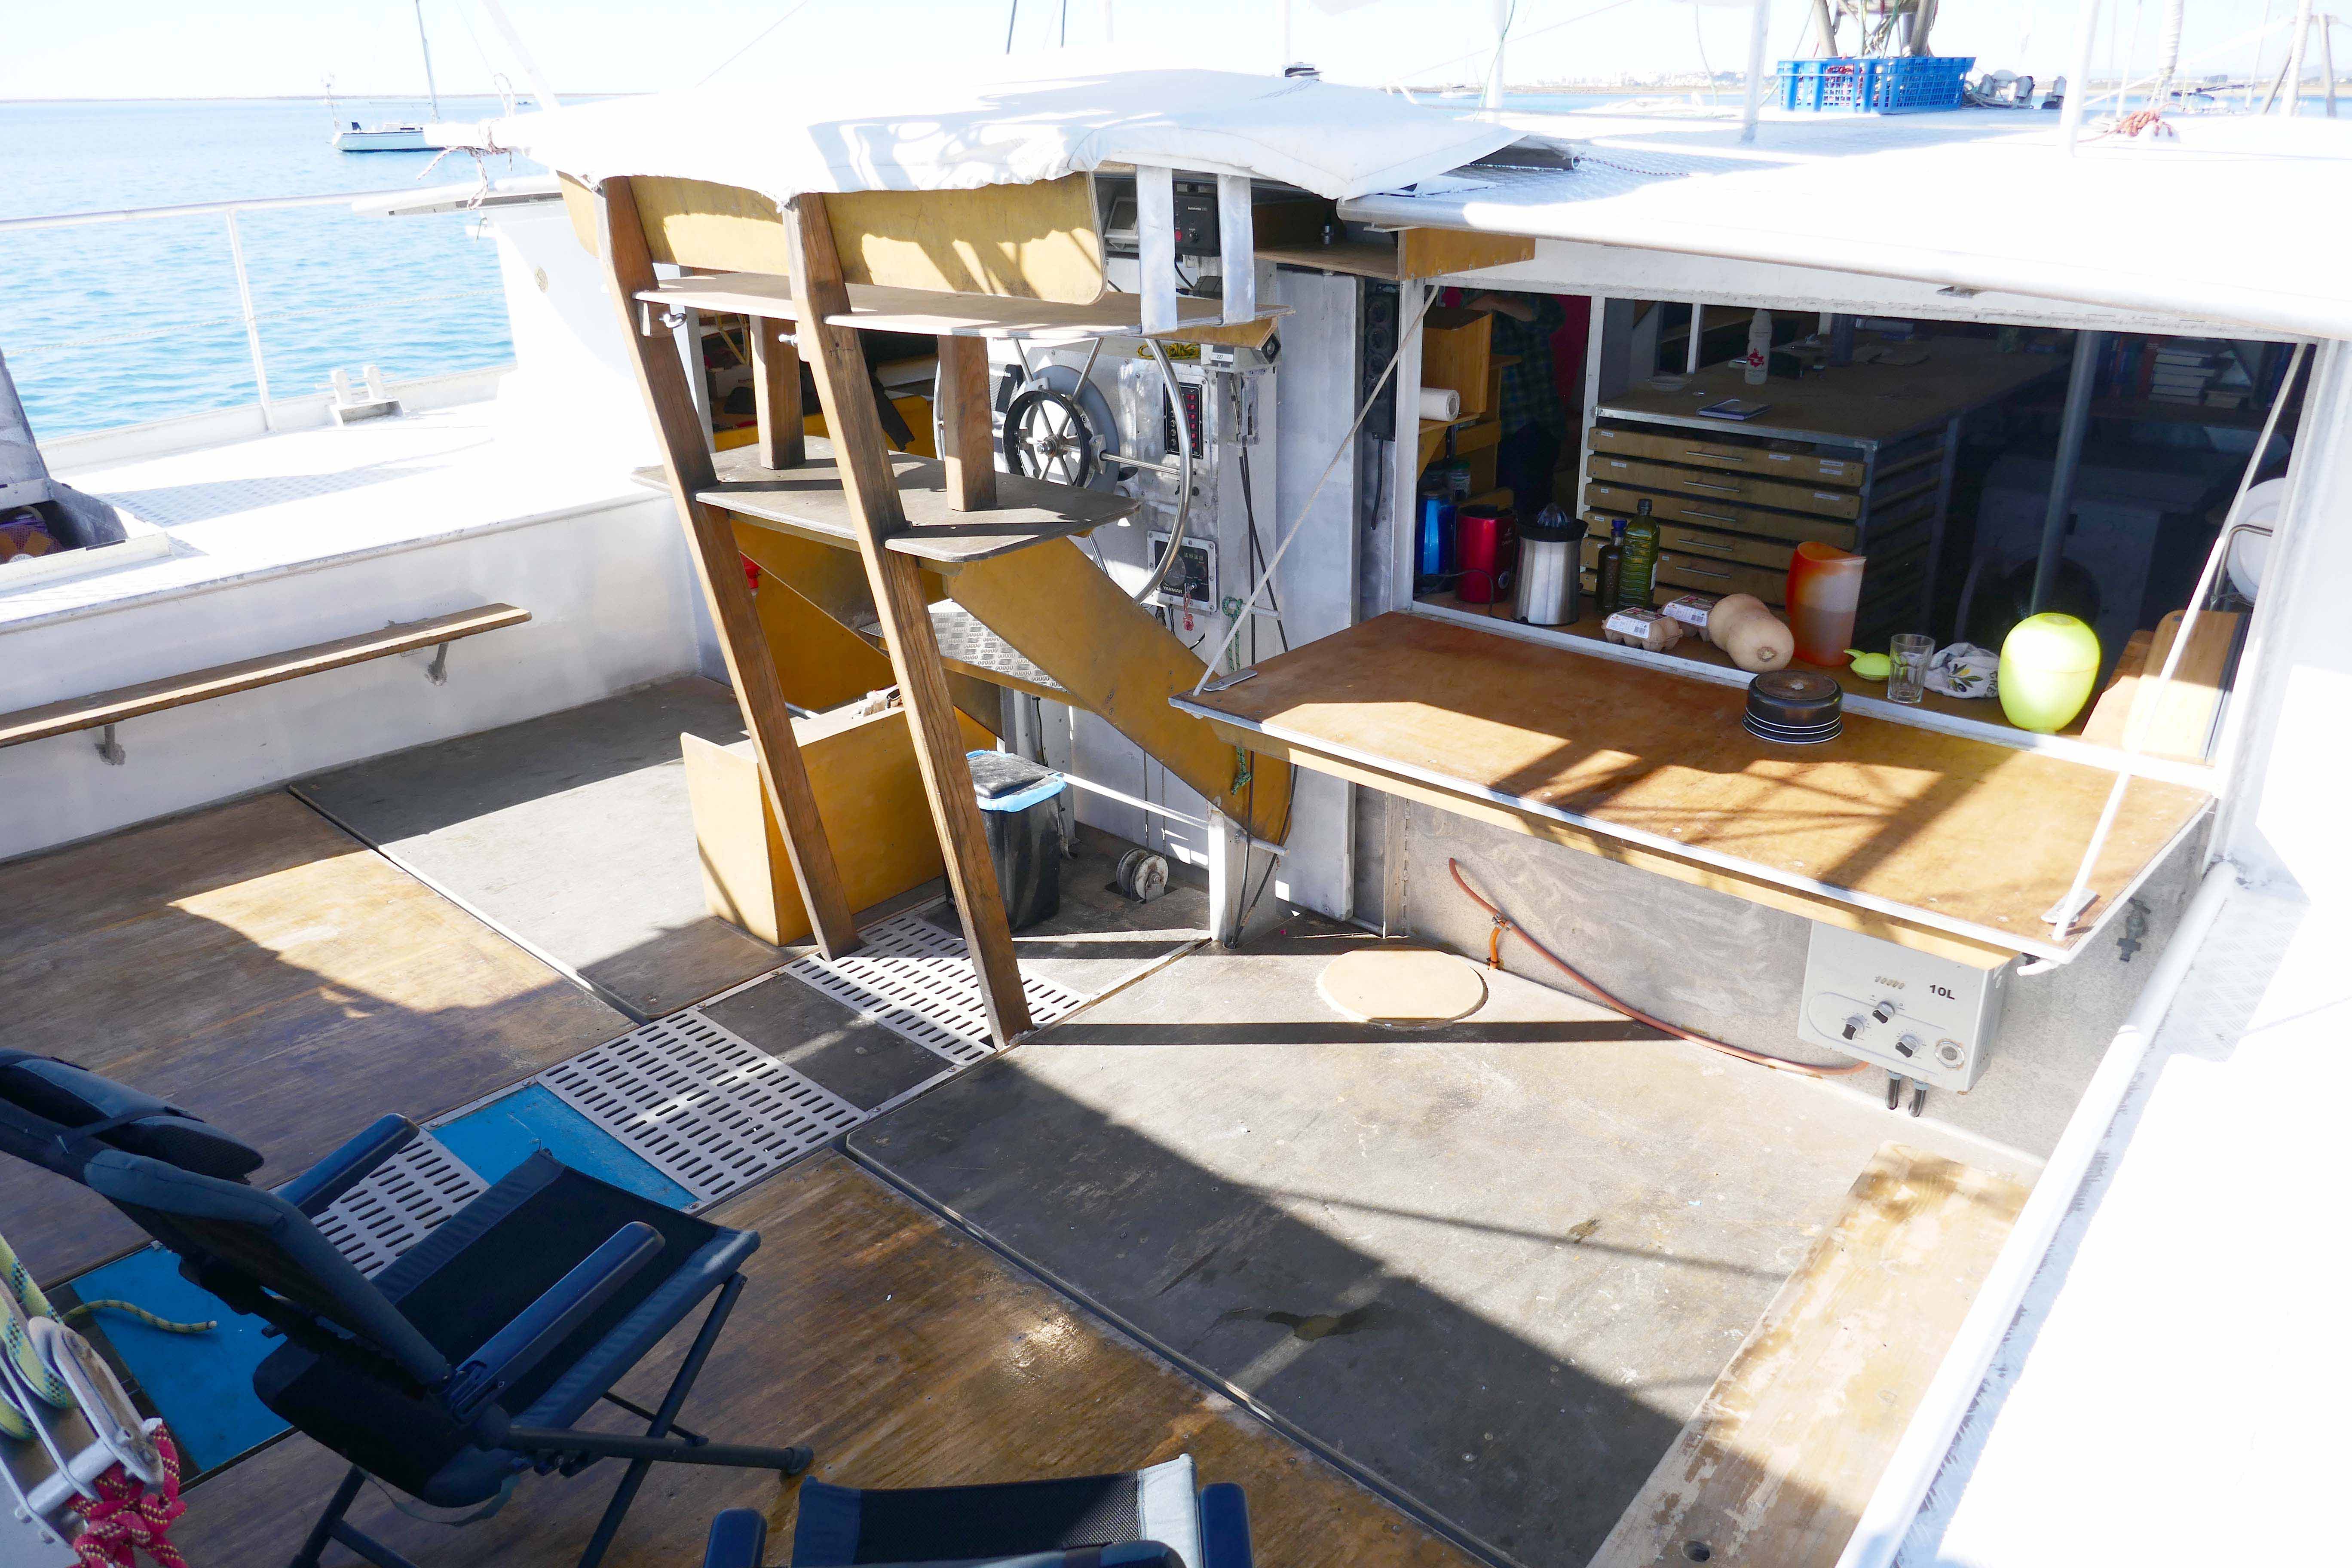 2012 Other WaveScalpel 57' Sailboat for sale in Portugal - image 7 